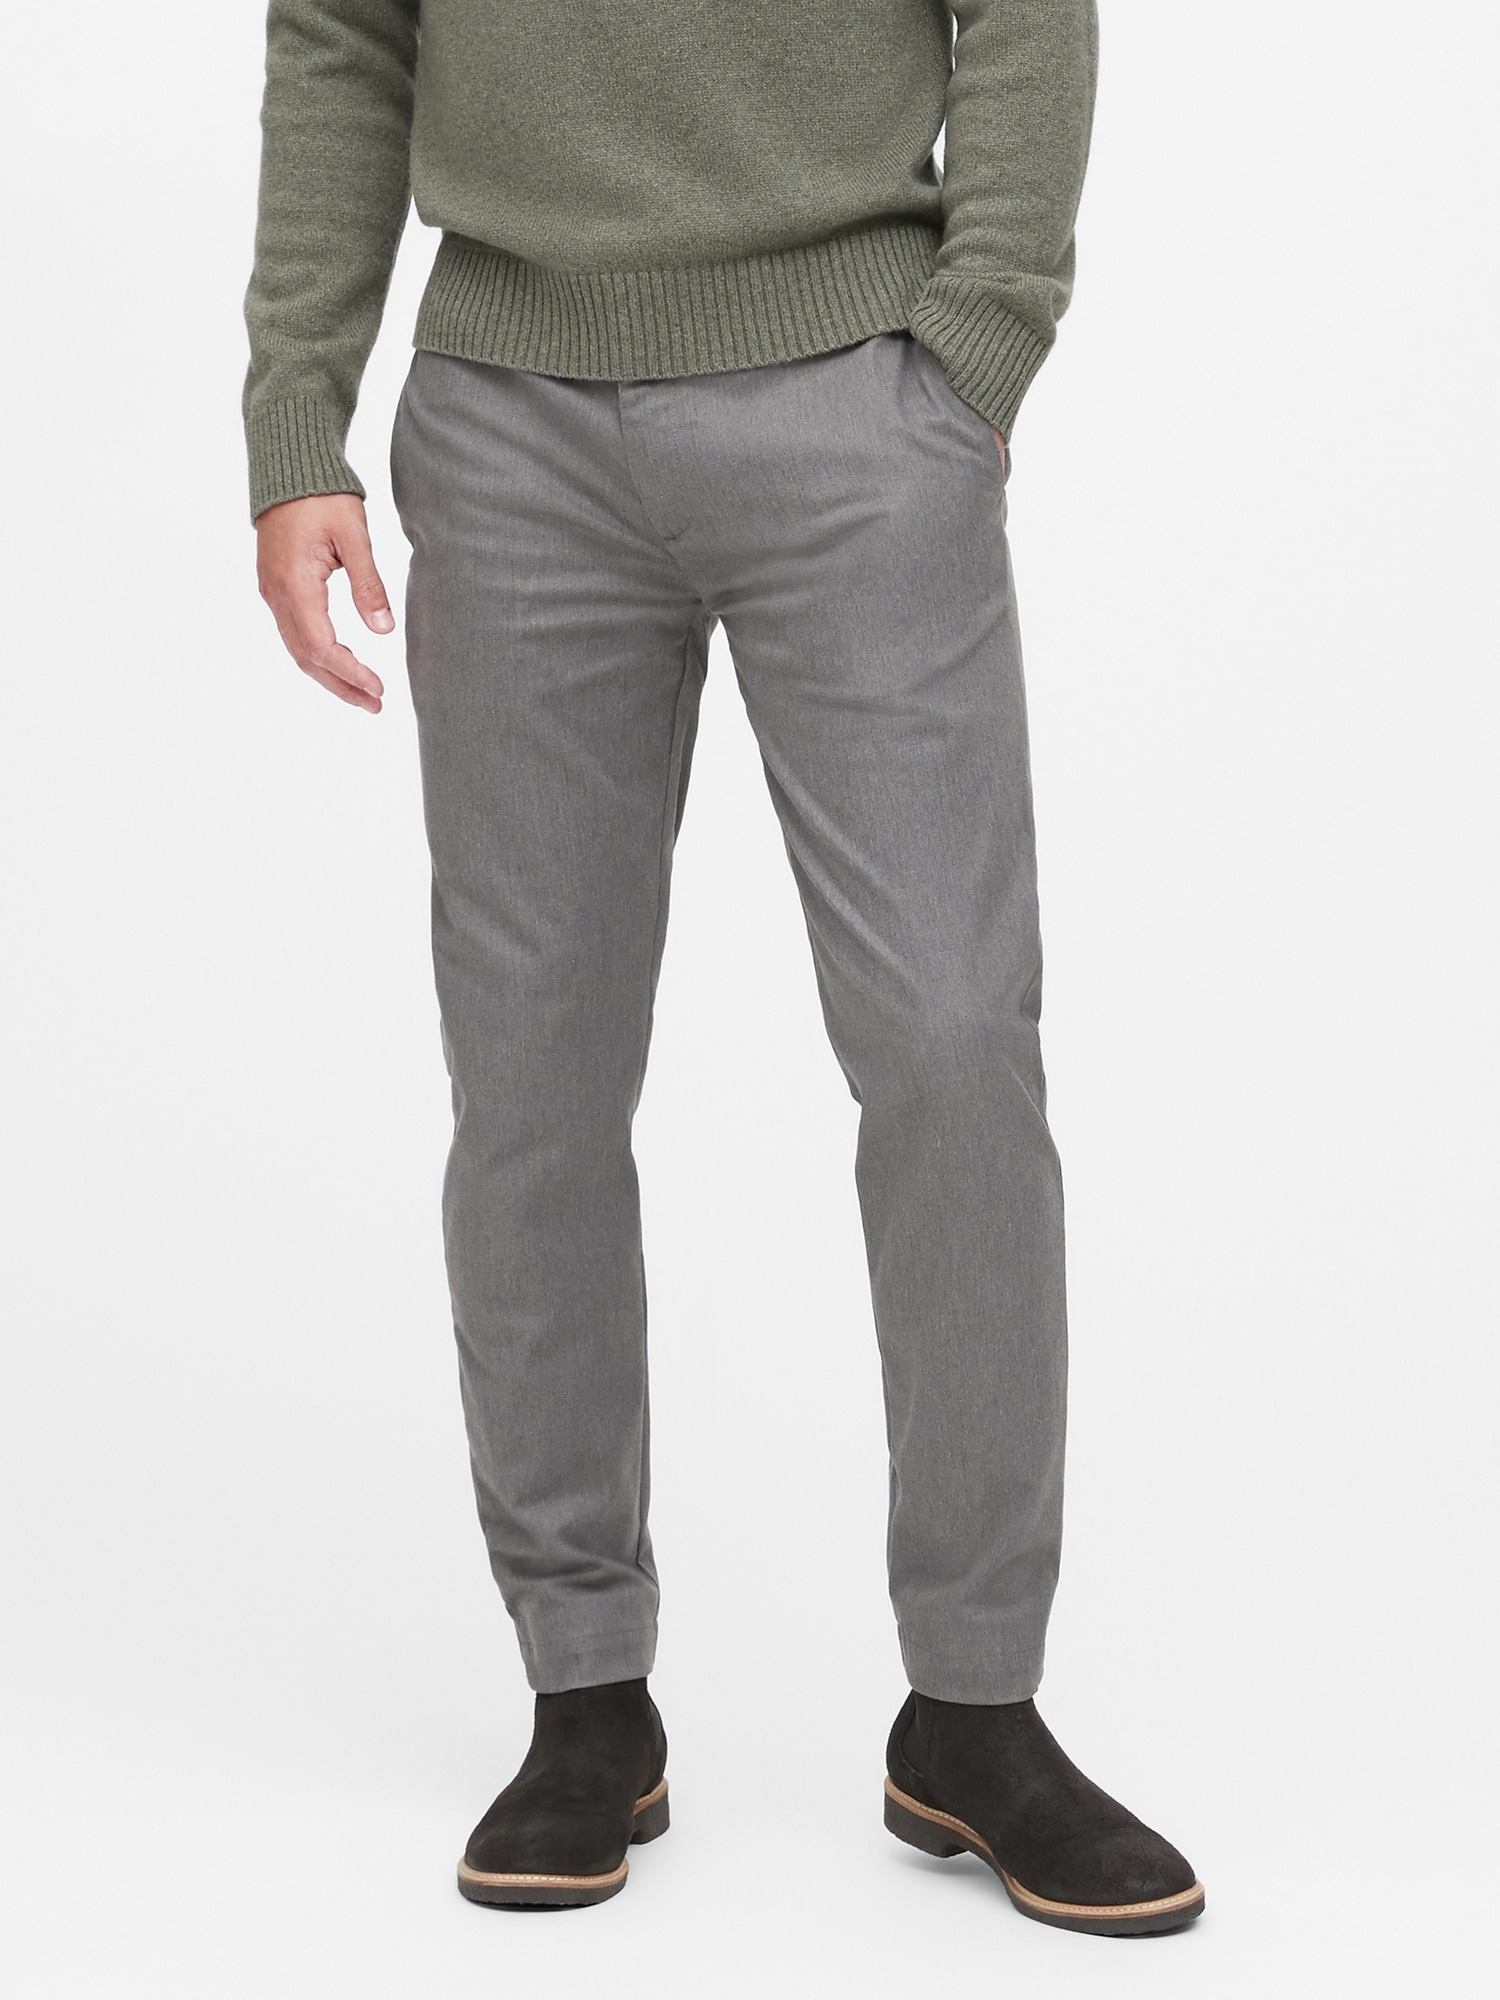 banana republic athletic fit jeans